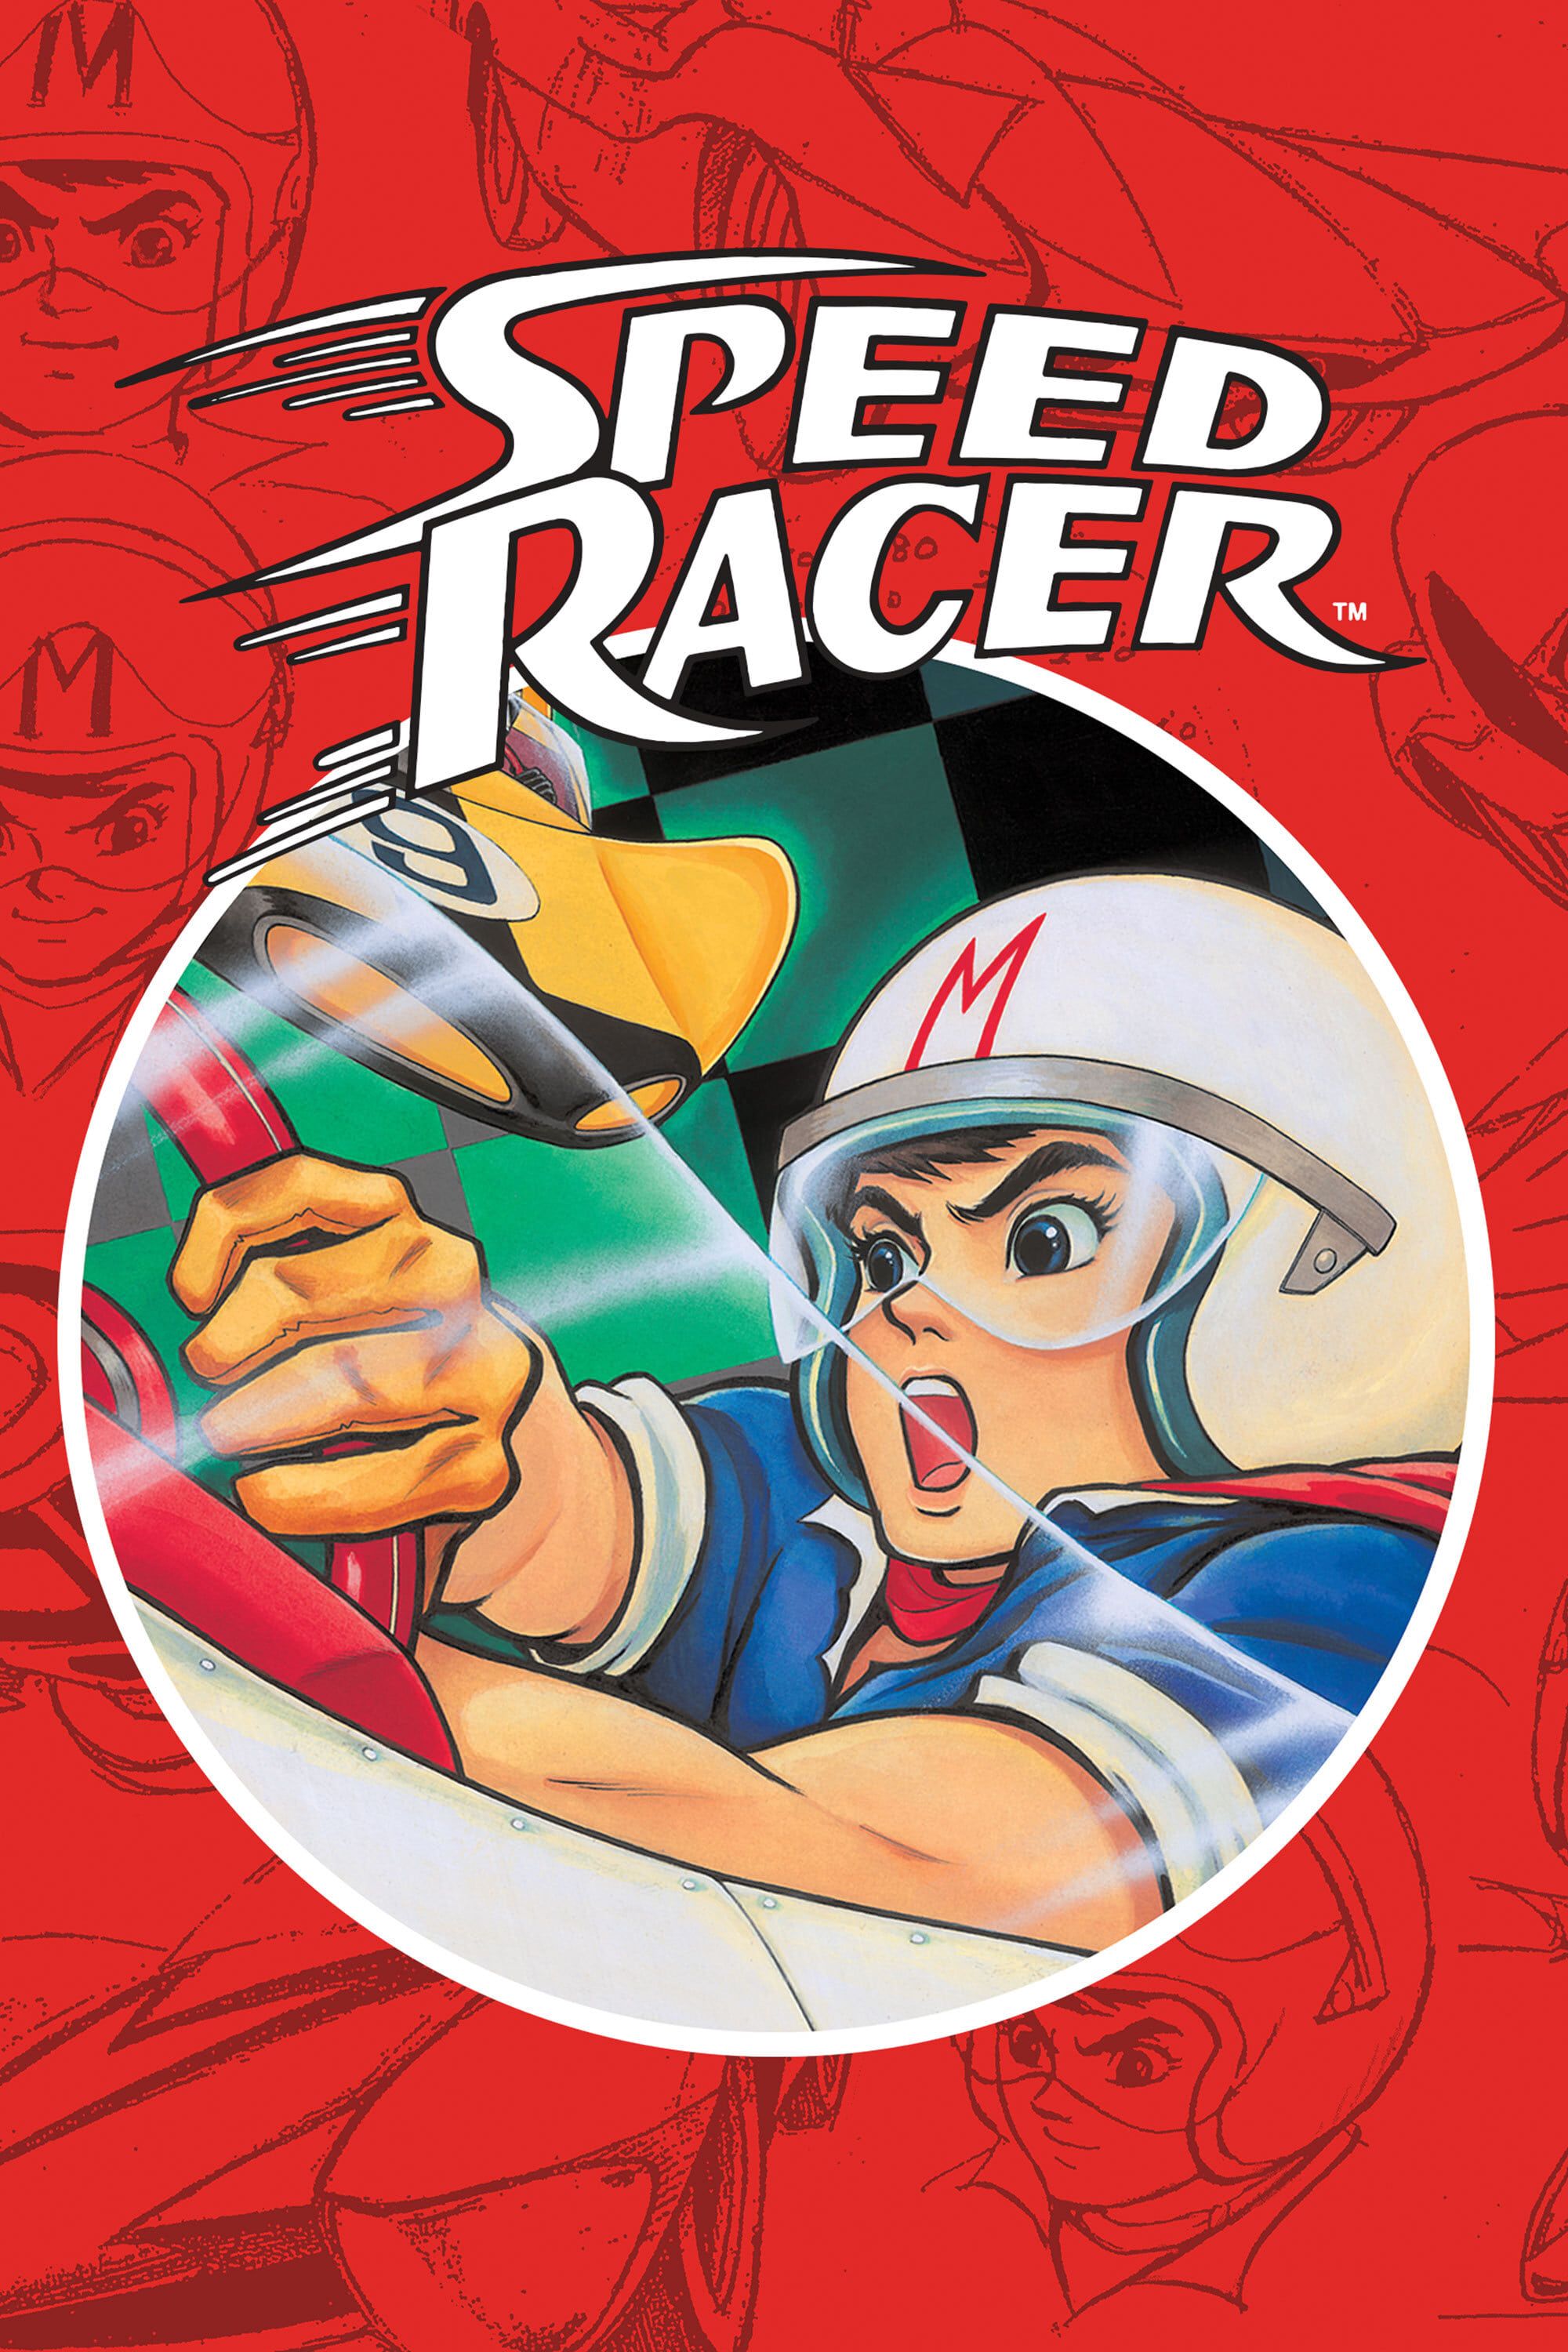 Speed Racer TV Show Poster Featuring Go Mifune Driving a Racecar-1